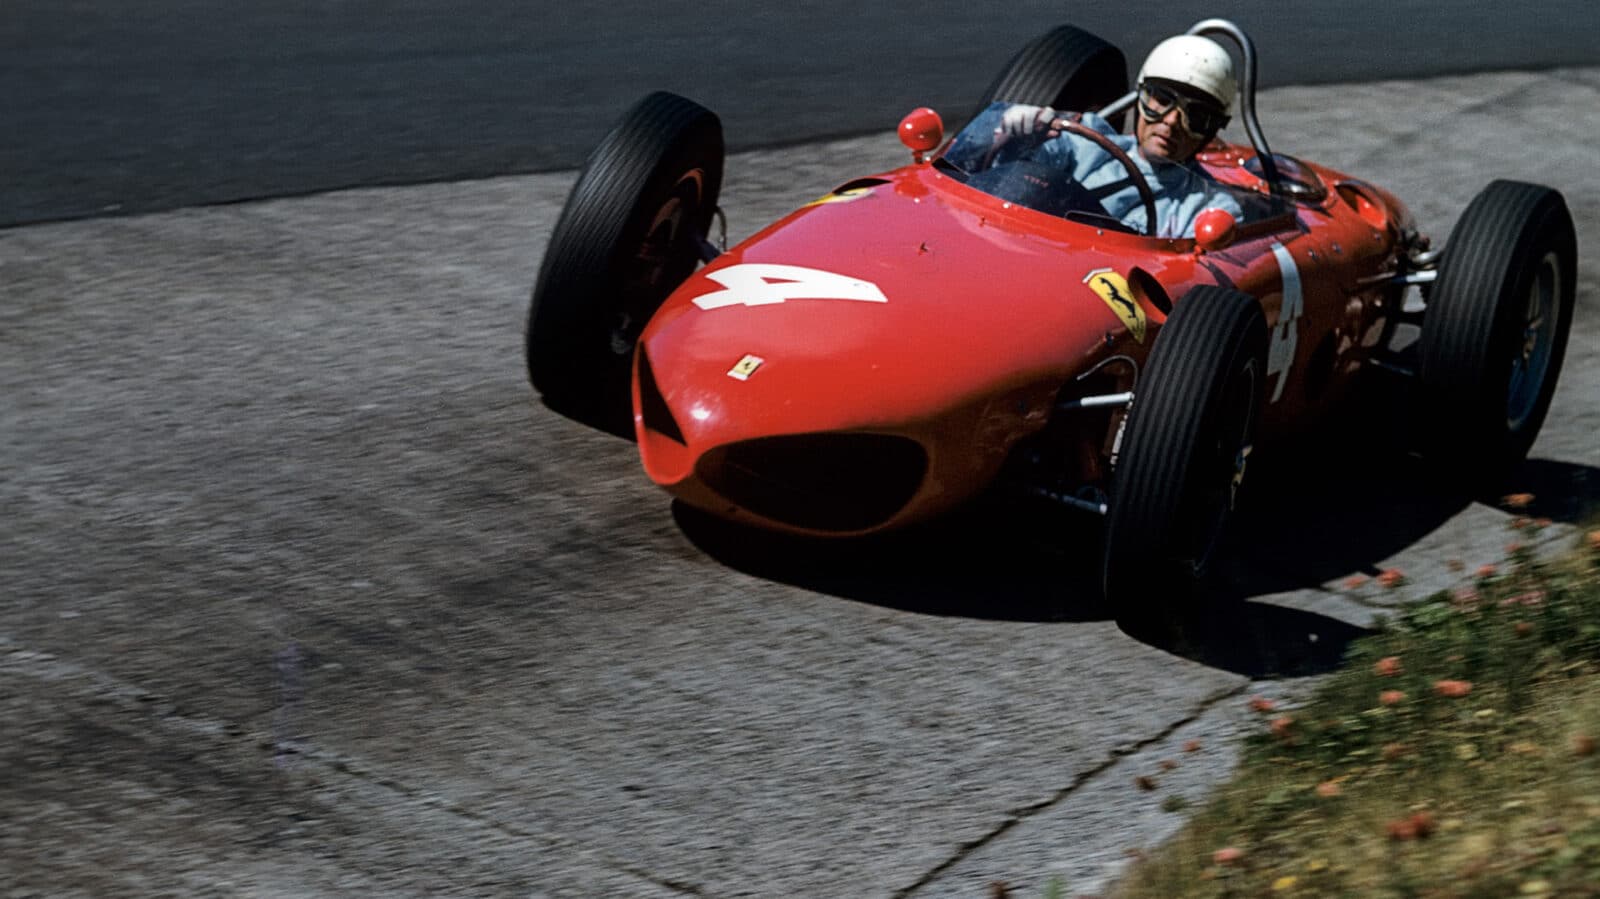 Phil Hill in Ferrari Sharknose